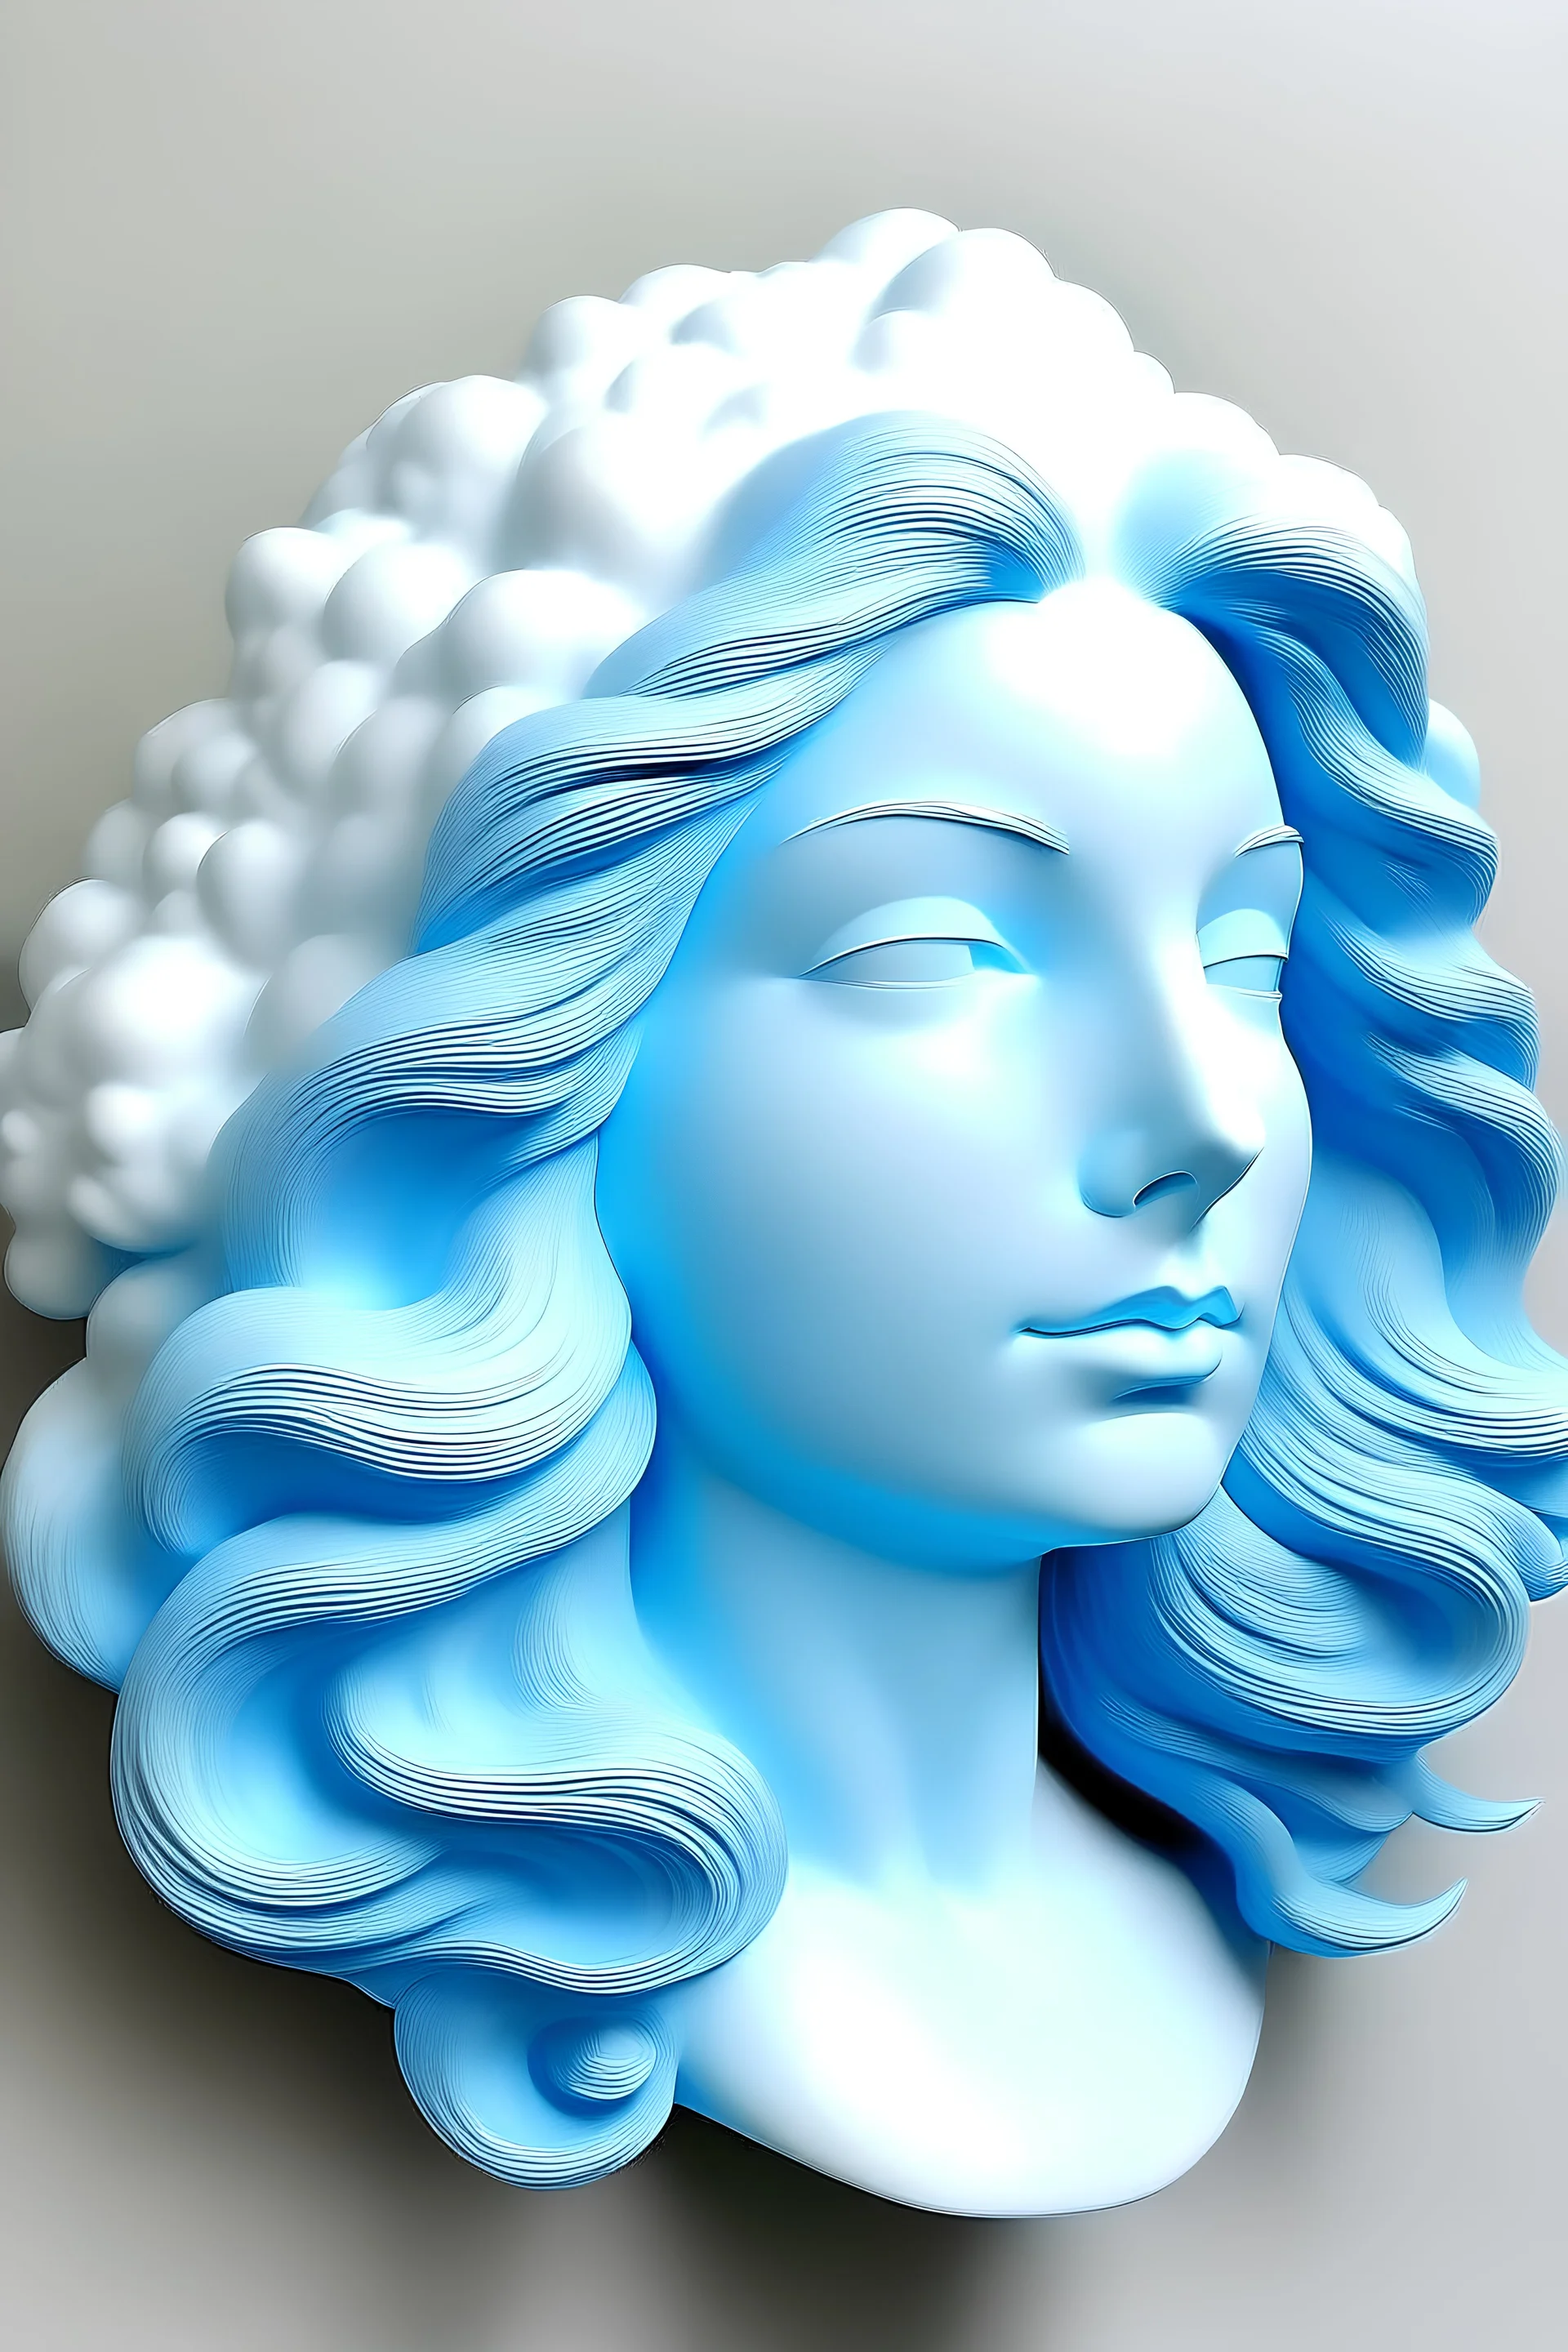 Full rubber female face with rubber effect in all face with cyan long hair sponge rubber effect with big white clouds